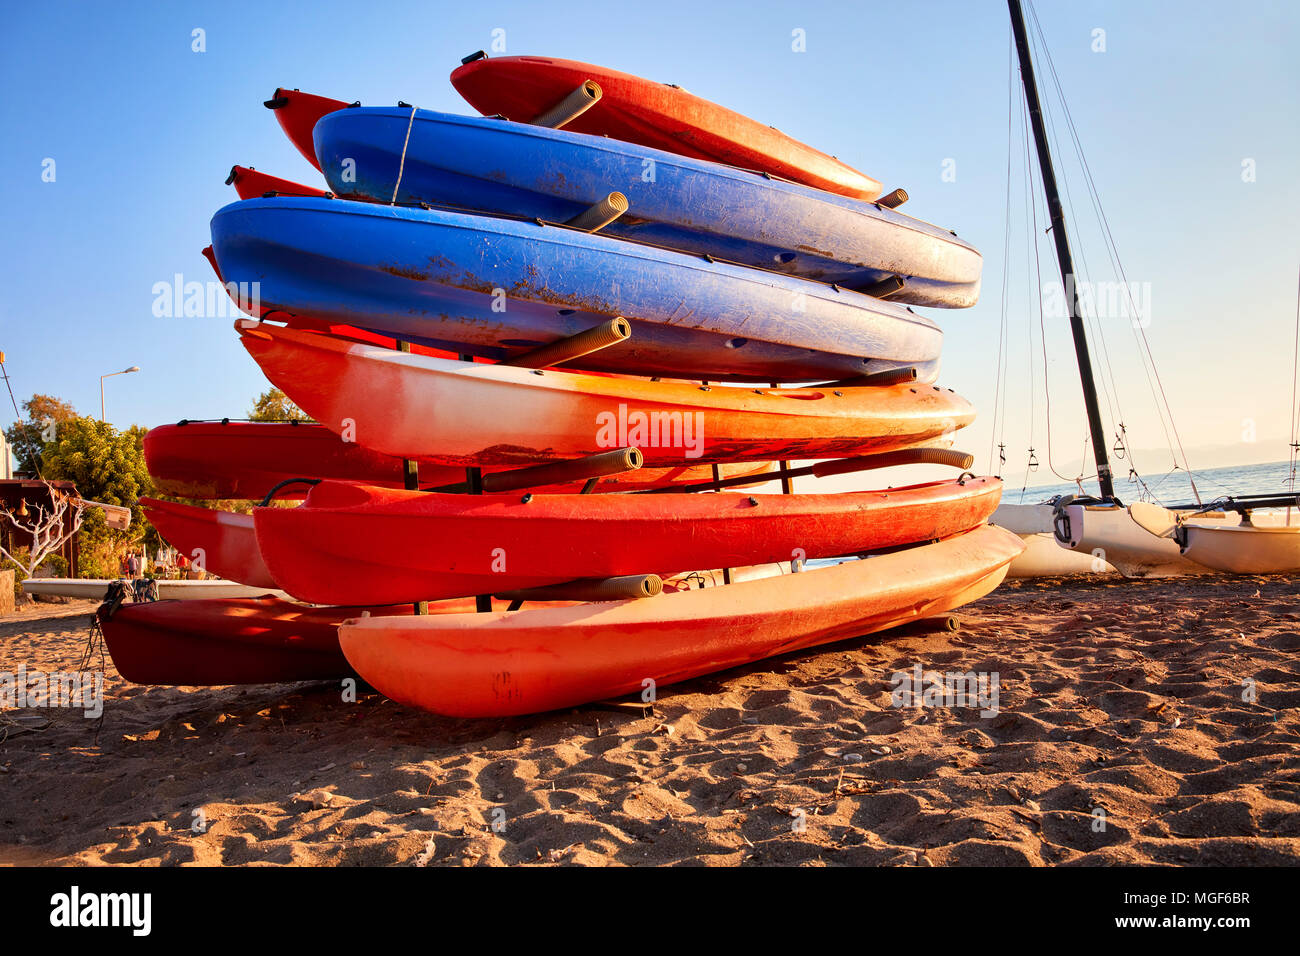 Colorful kayaks for hire on a canoe stand at the beach of a touristic vacation place Stock Photo